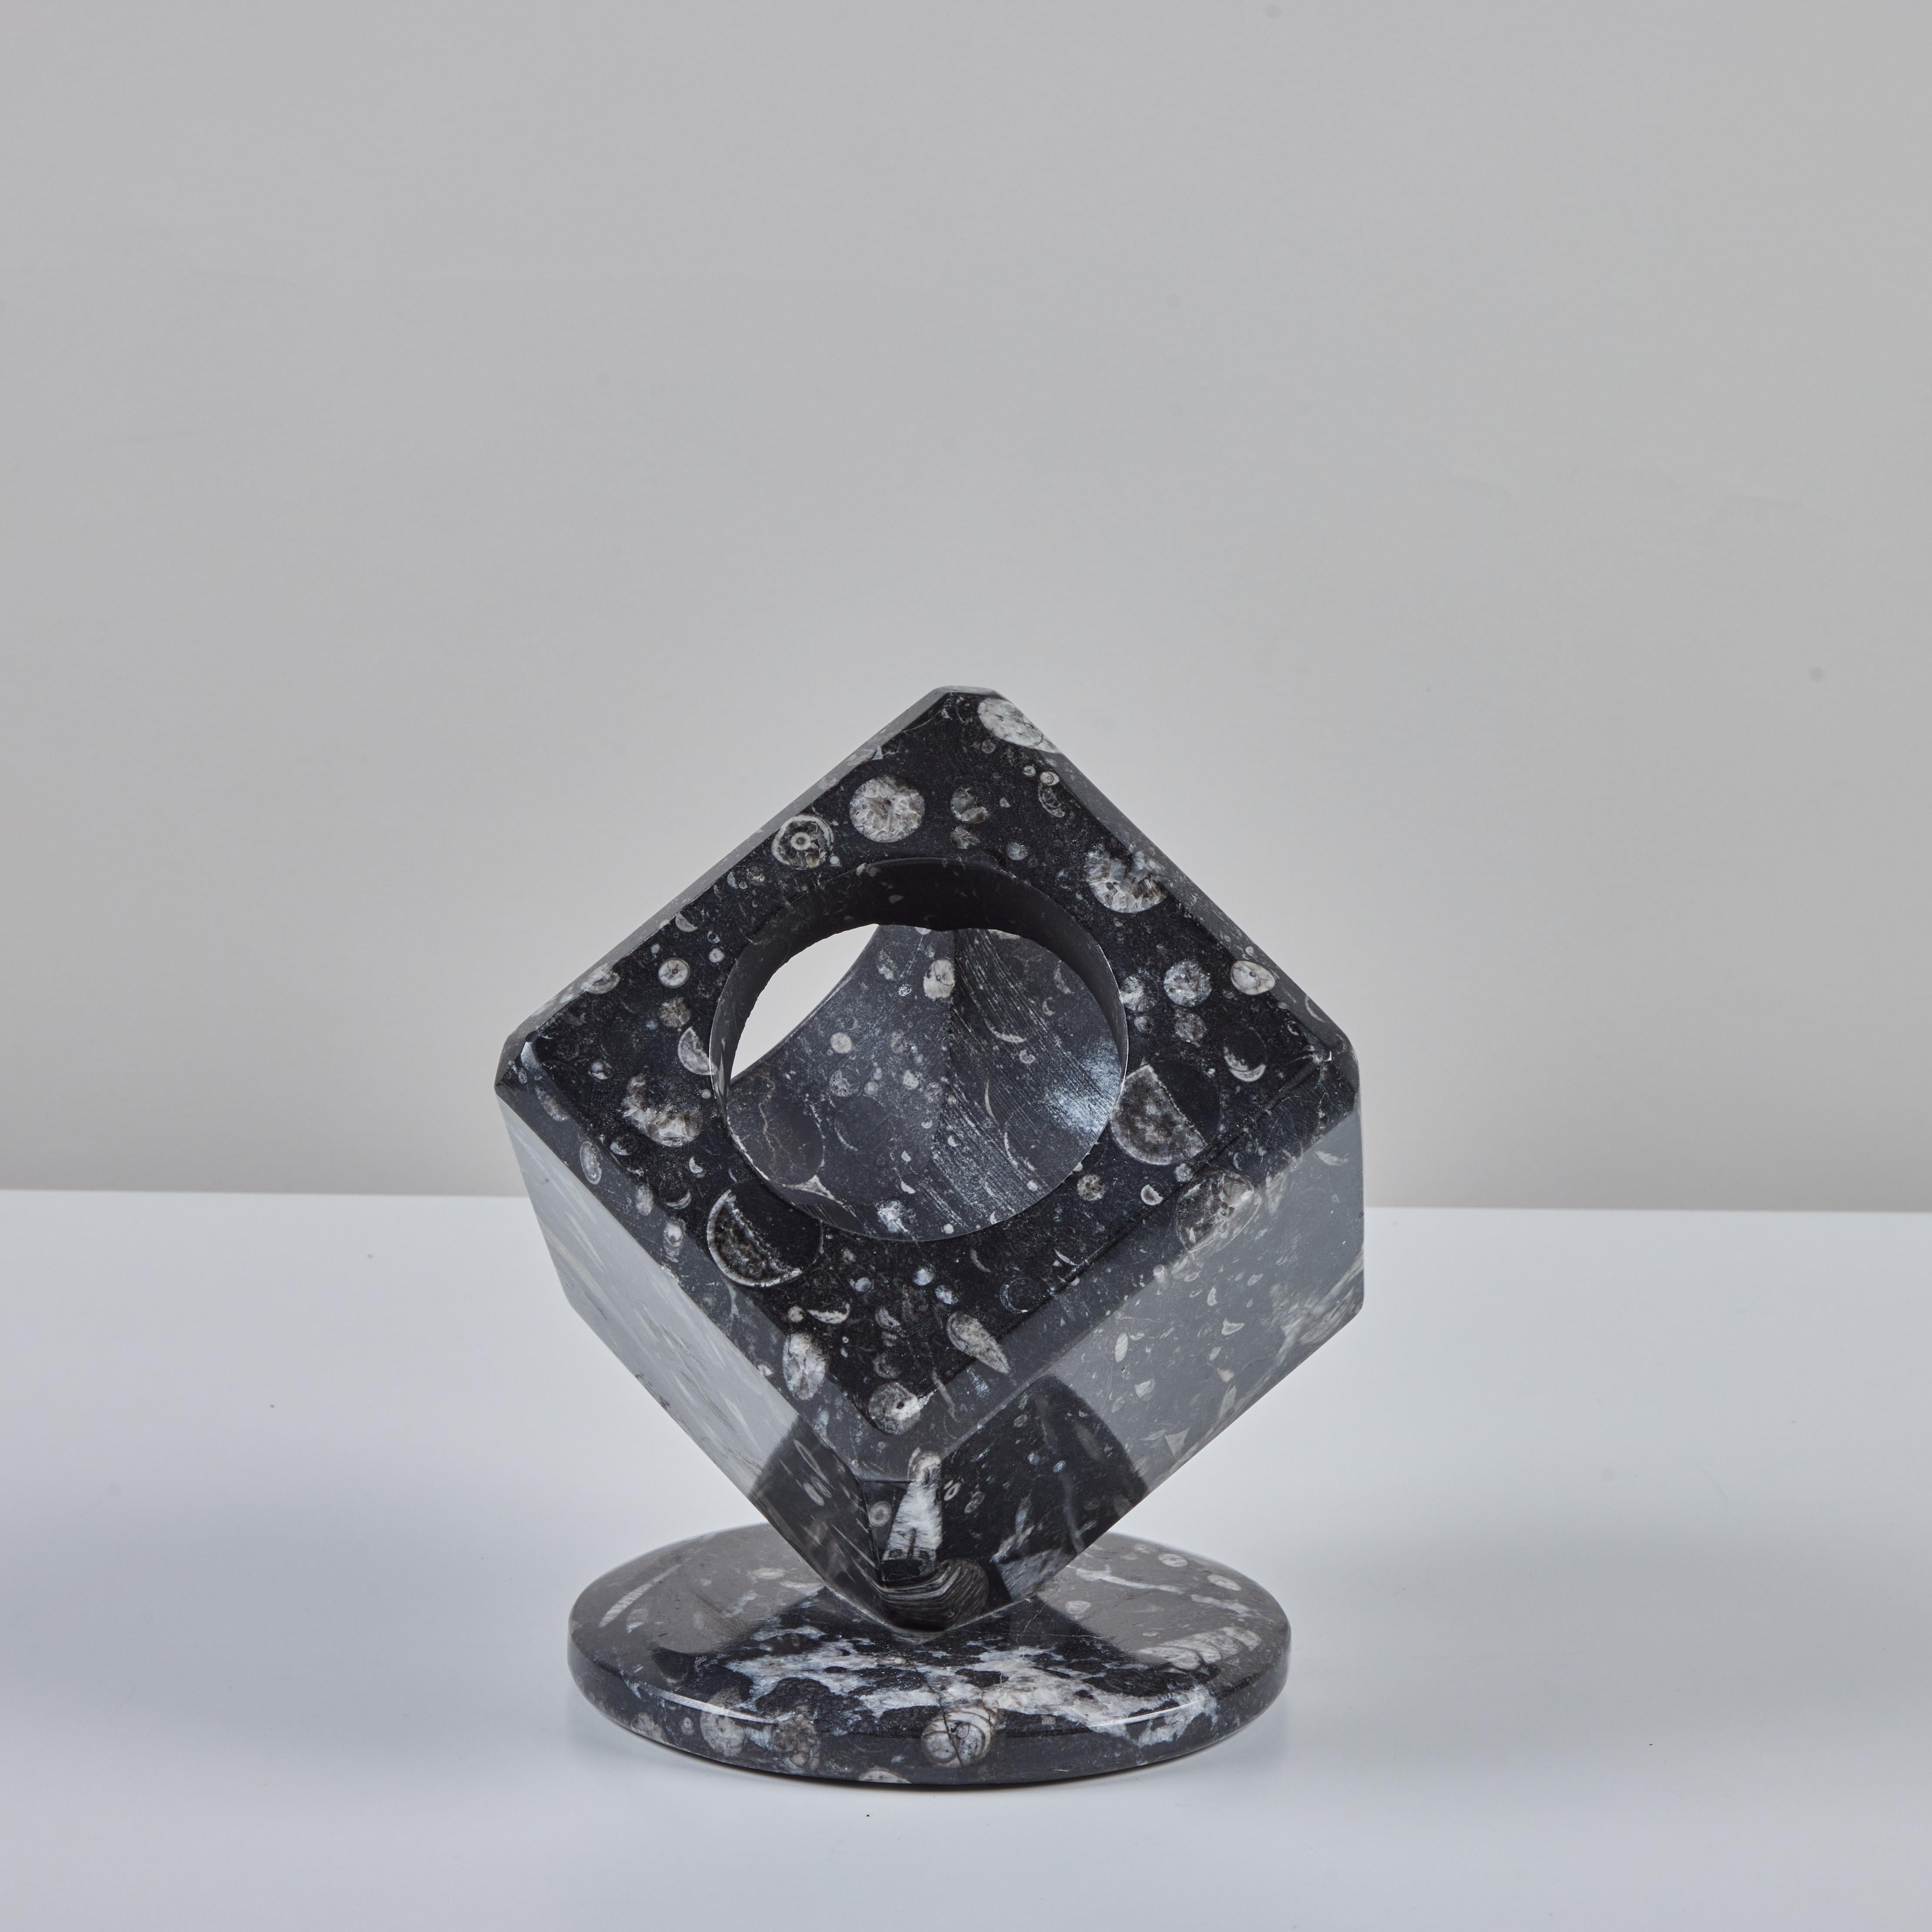 Polished Fossilized Black Marble Cube Sculpture